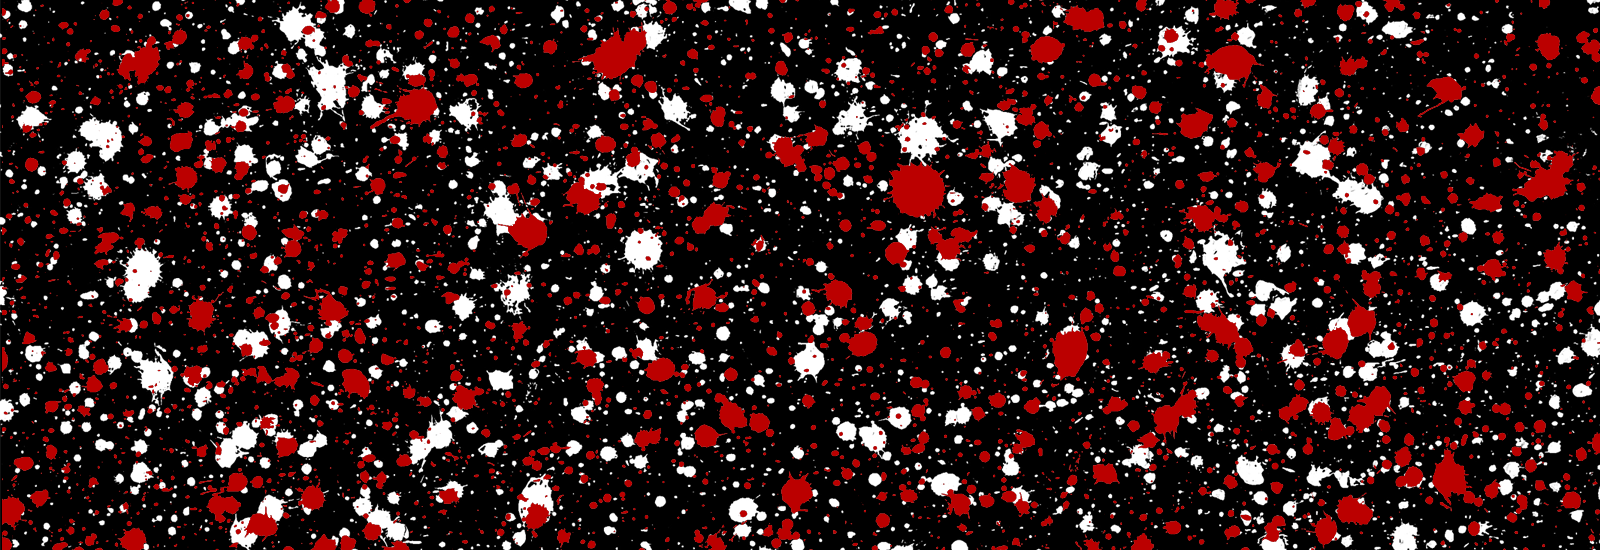 Red and white paint splatter pattern over a black background